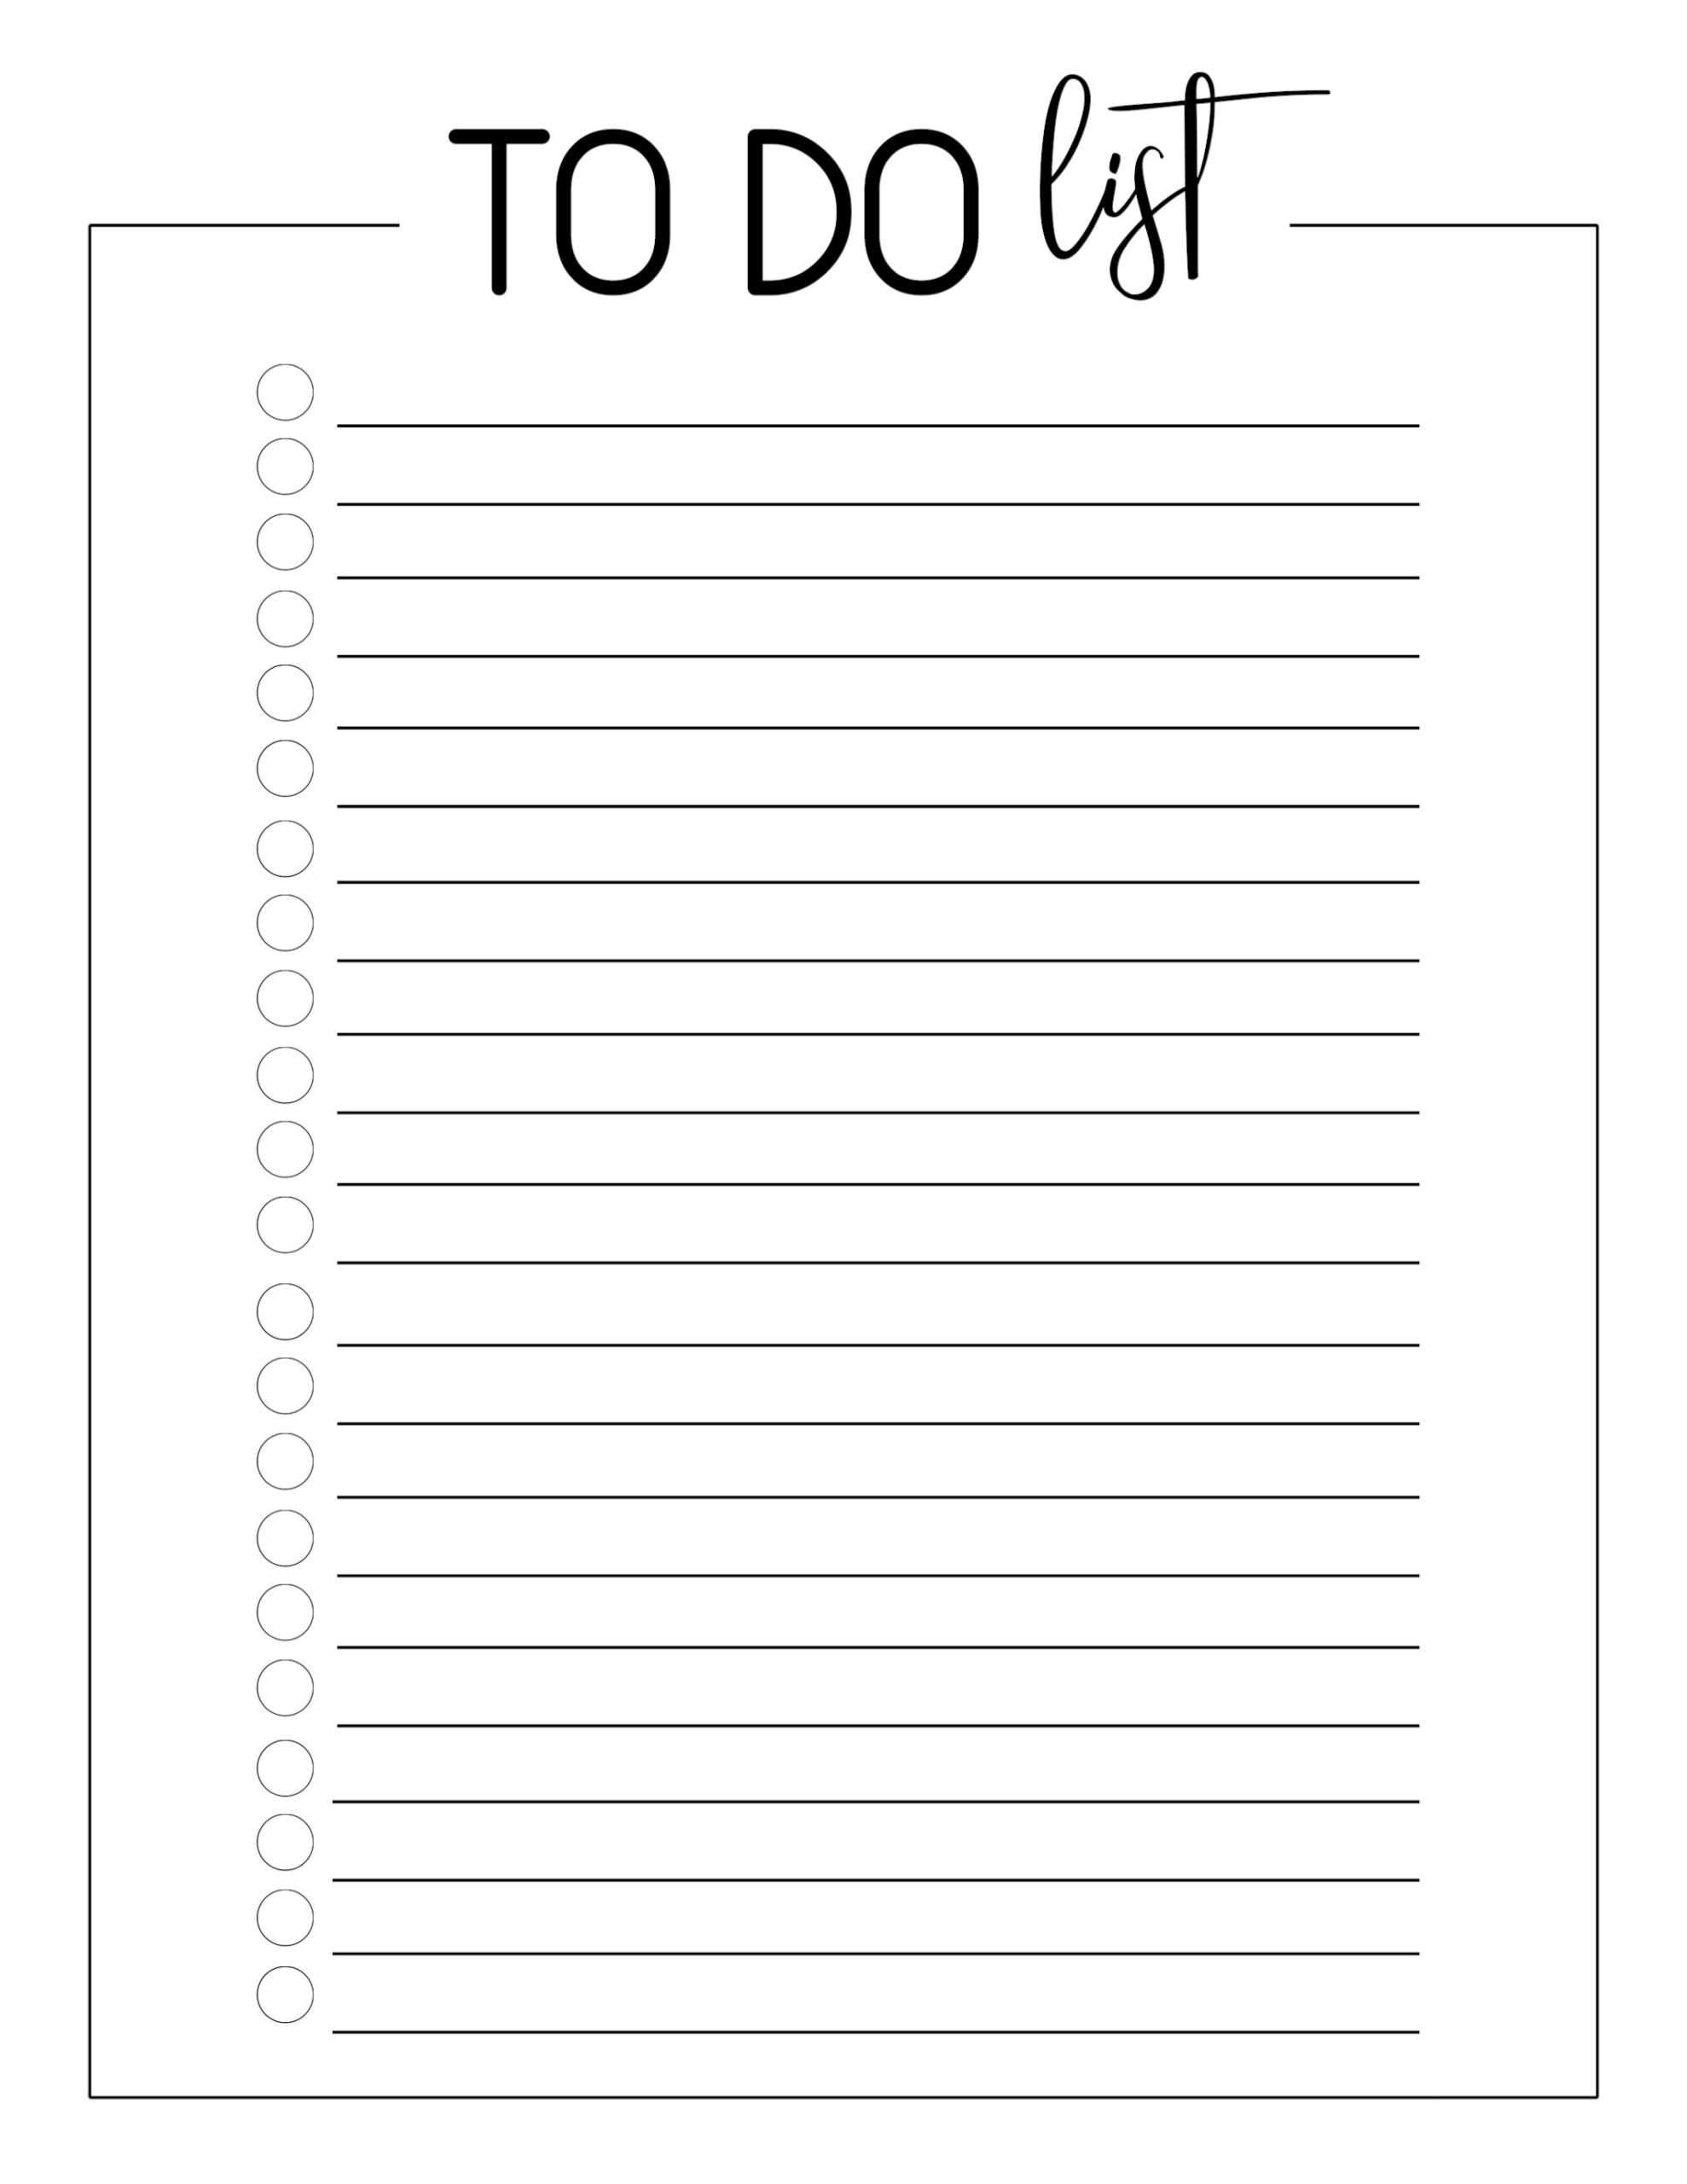 Blank To Do List Template - Best Professional Templates